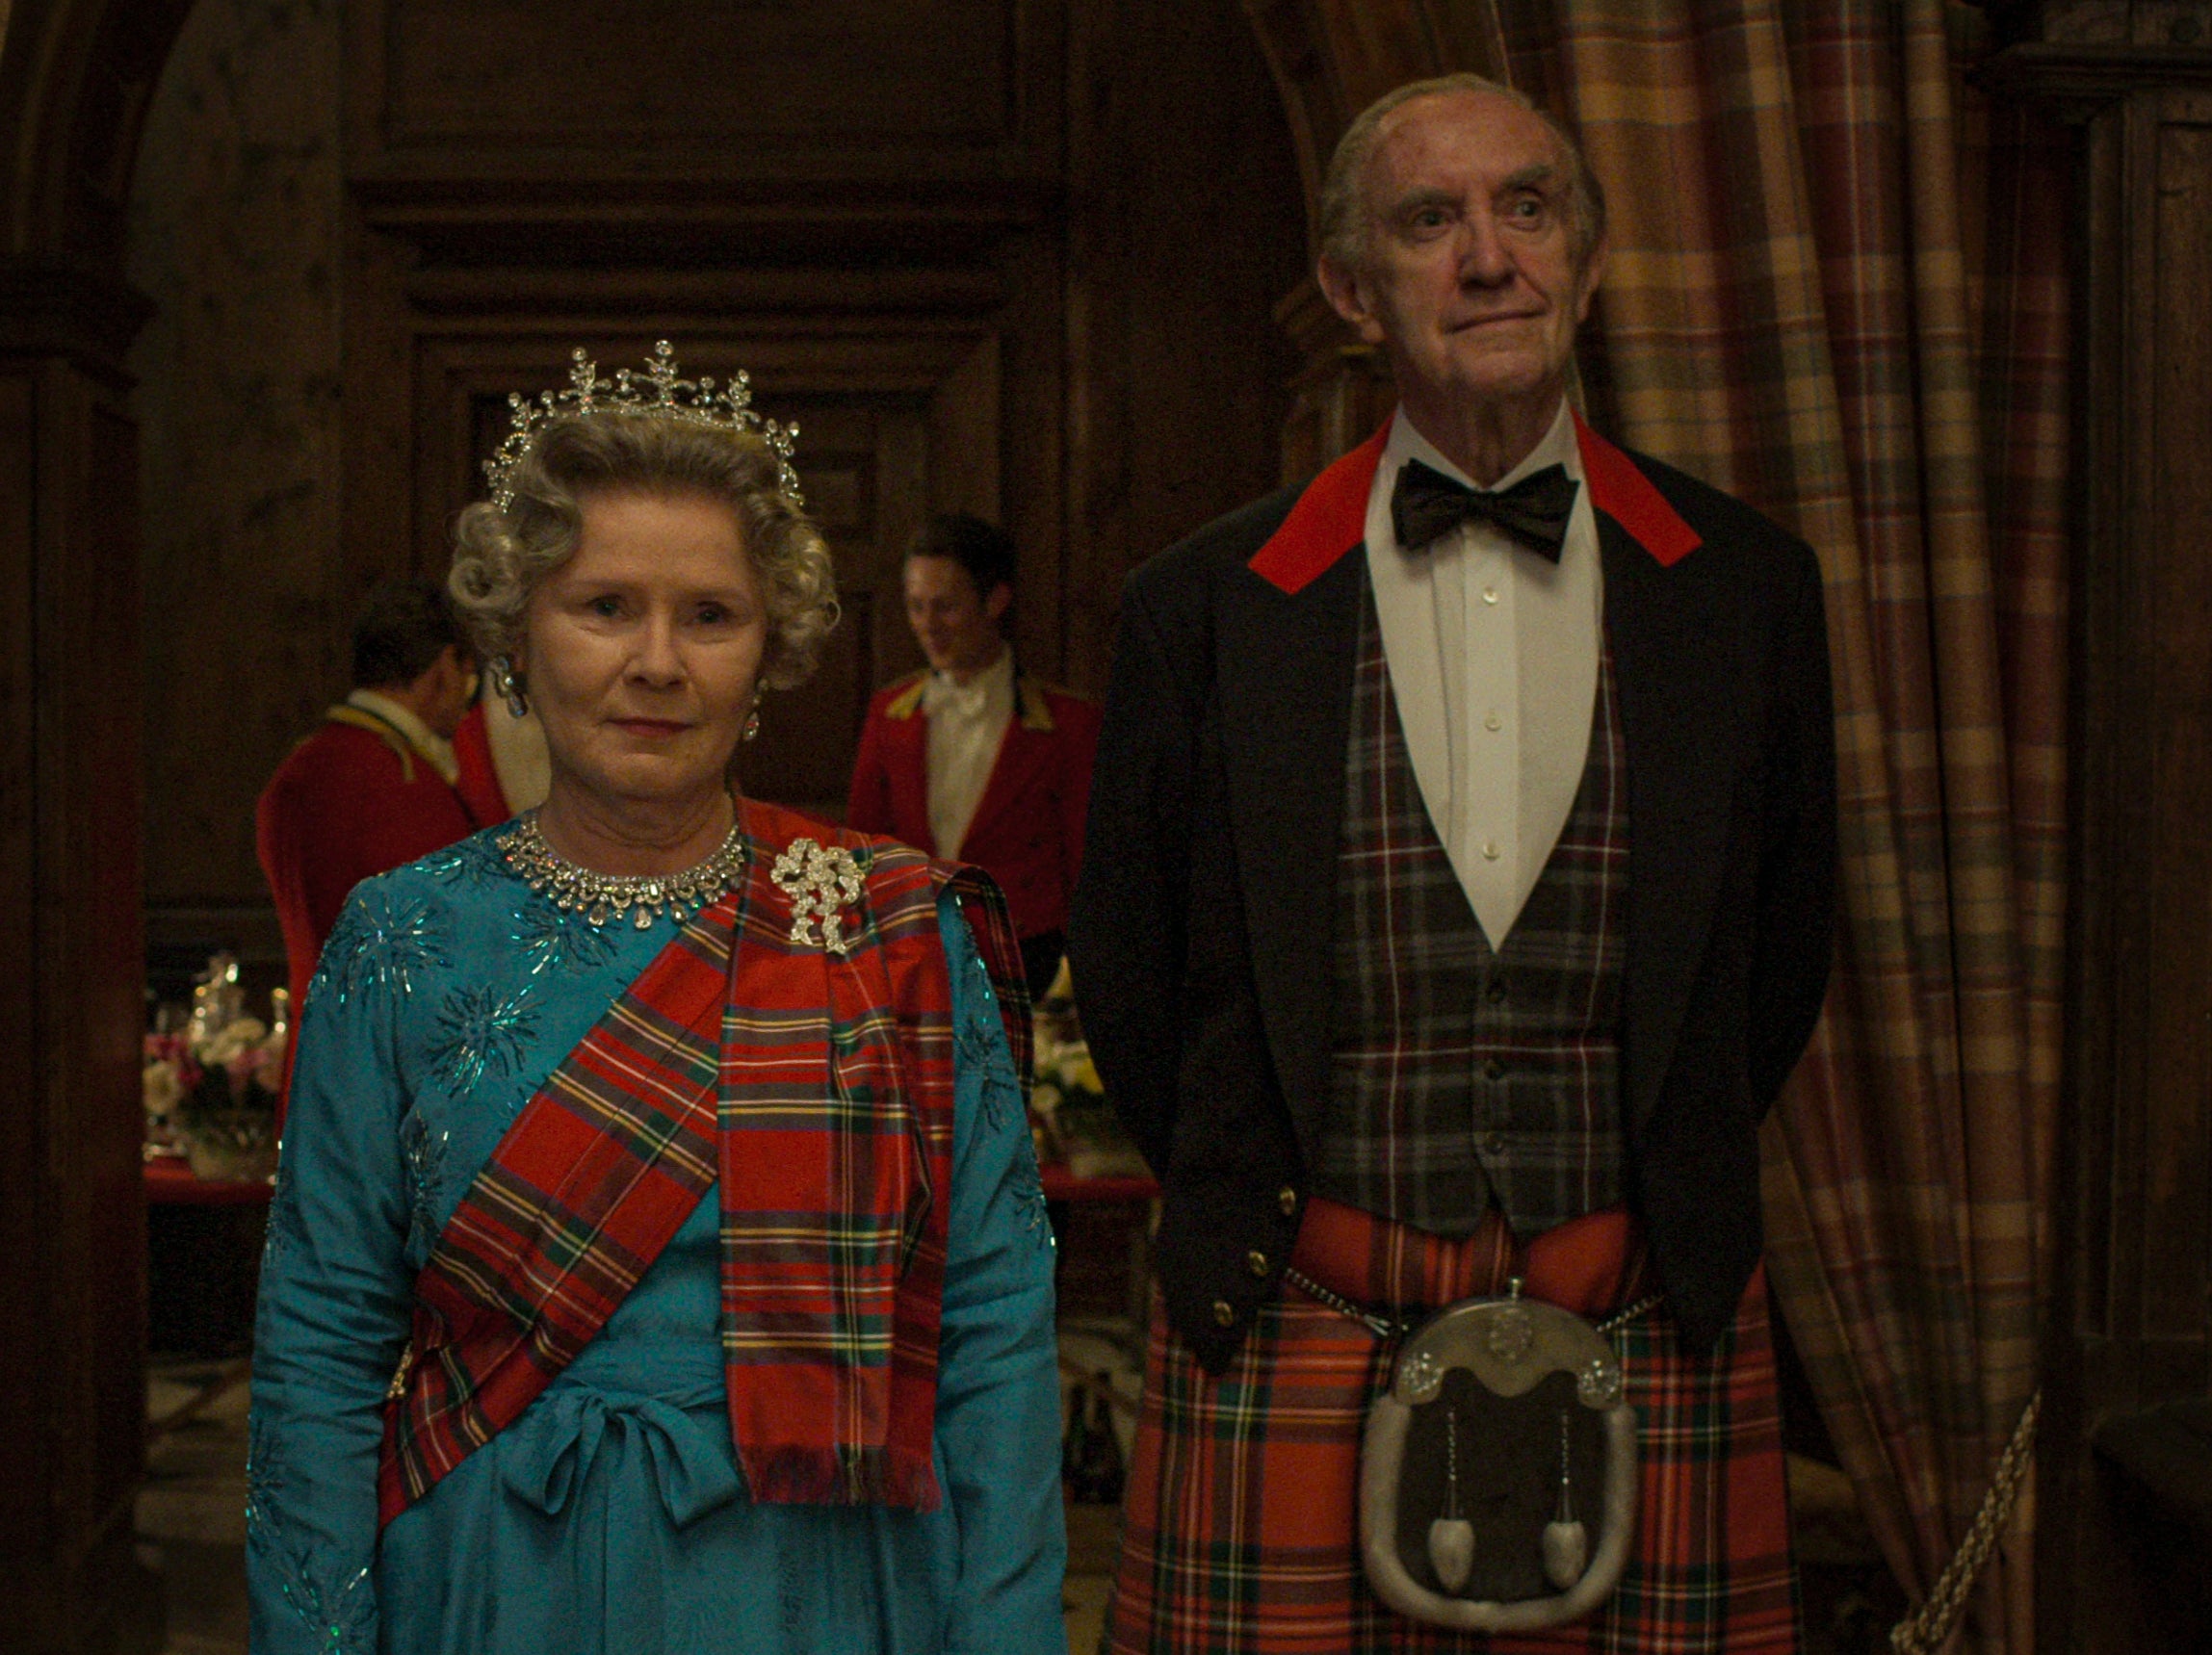 Imelda Staunton as The Queen and Jonathan Pryce as Prince Philip in ‘The Crown’